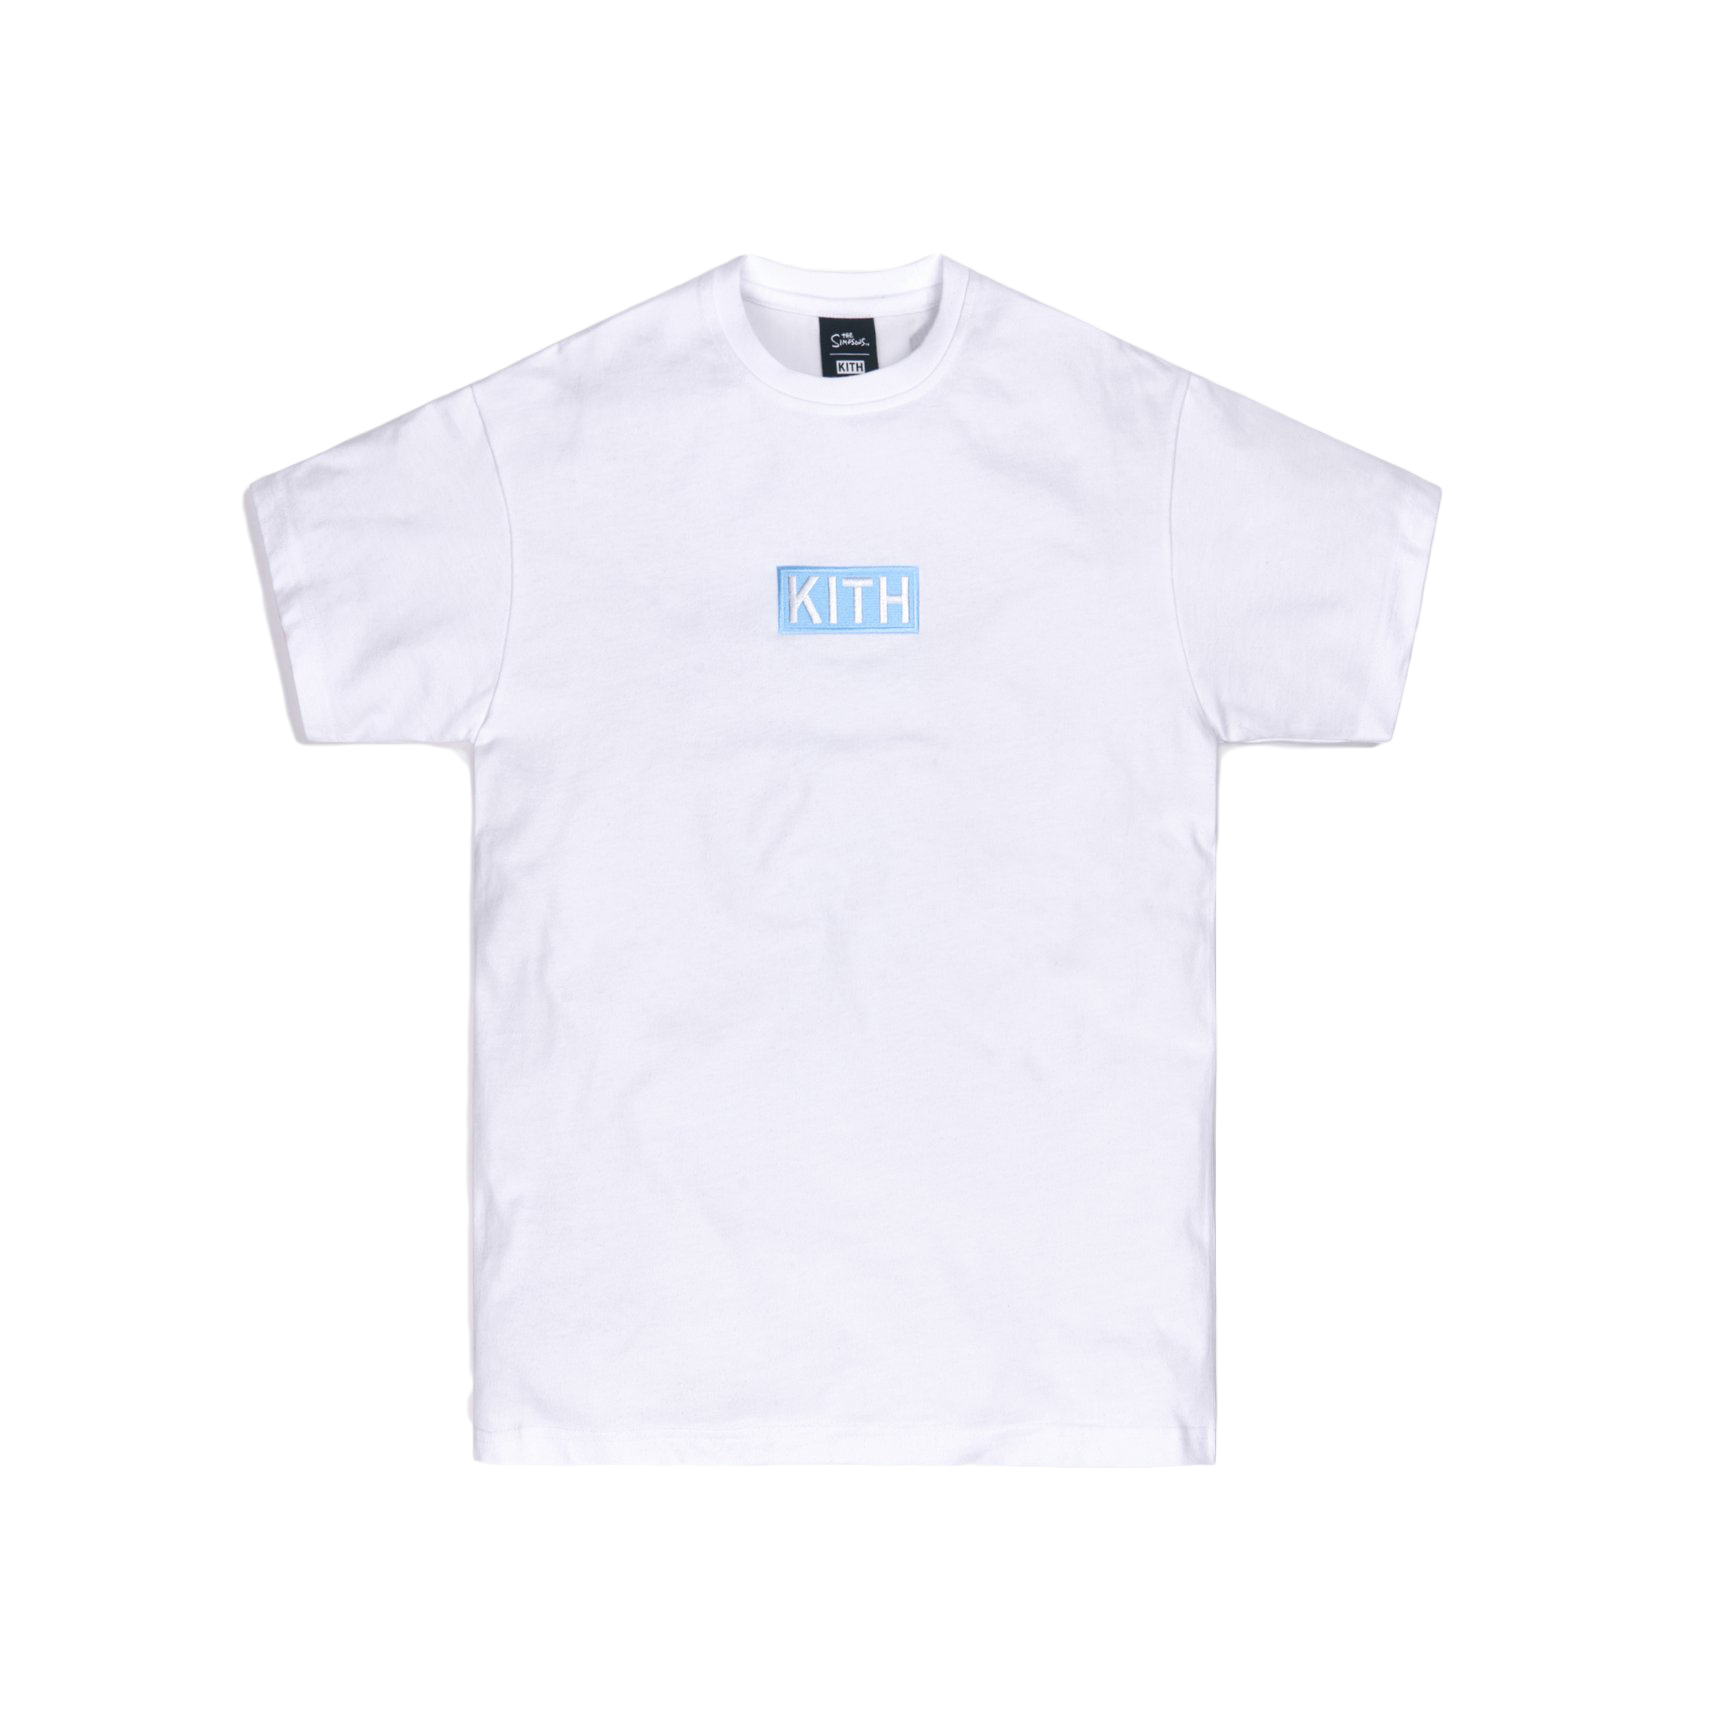 Kith x The Simpsons Cast Of Characters Tee White Men's - SS21 - US